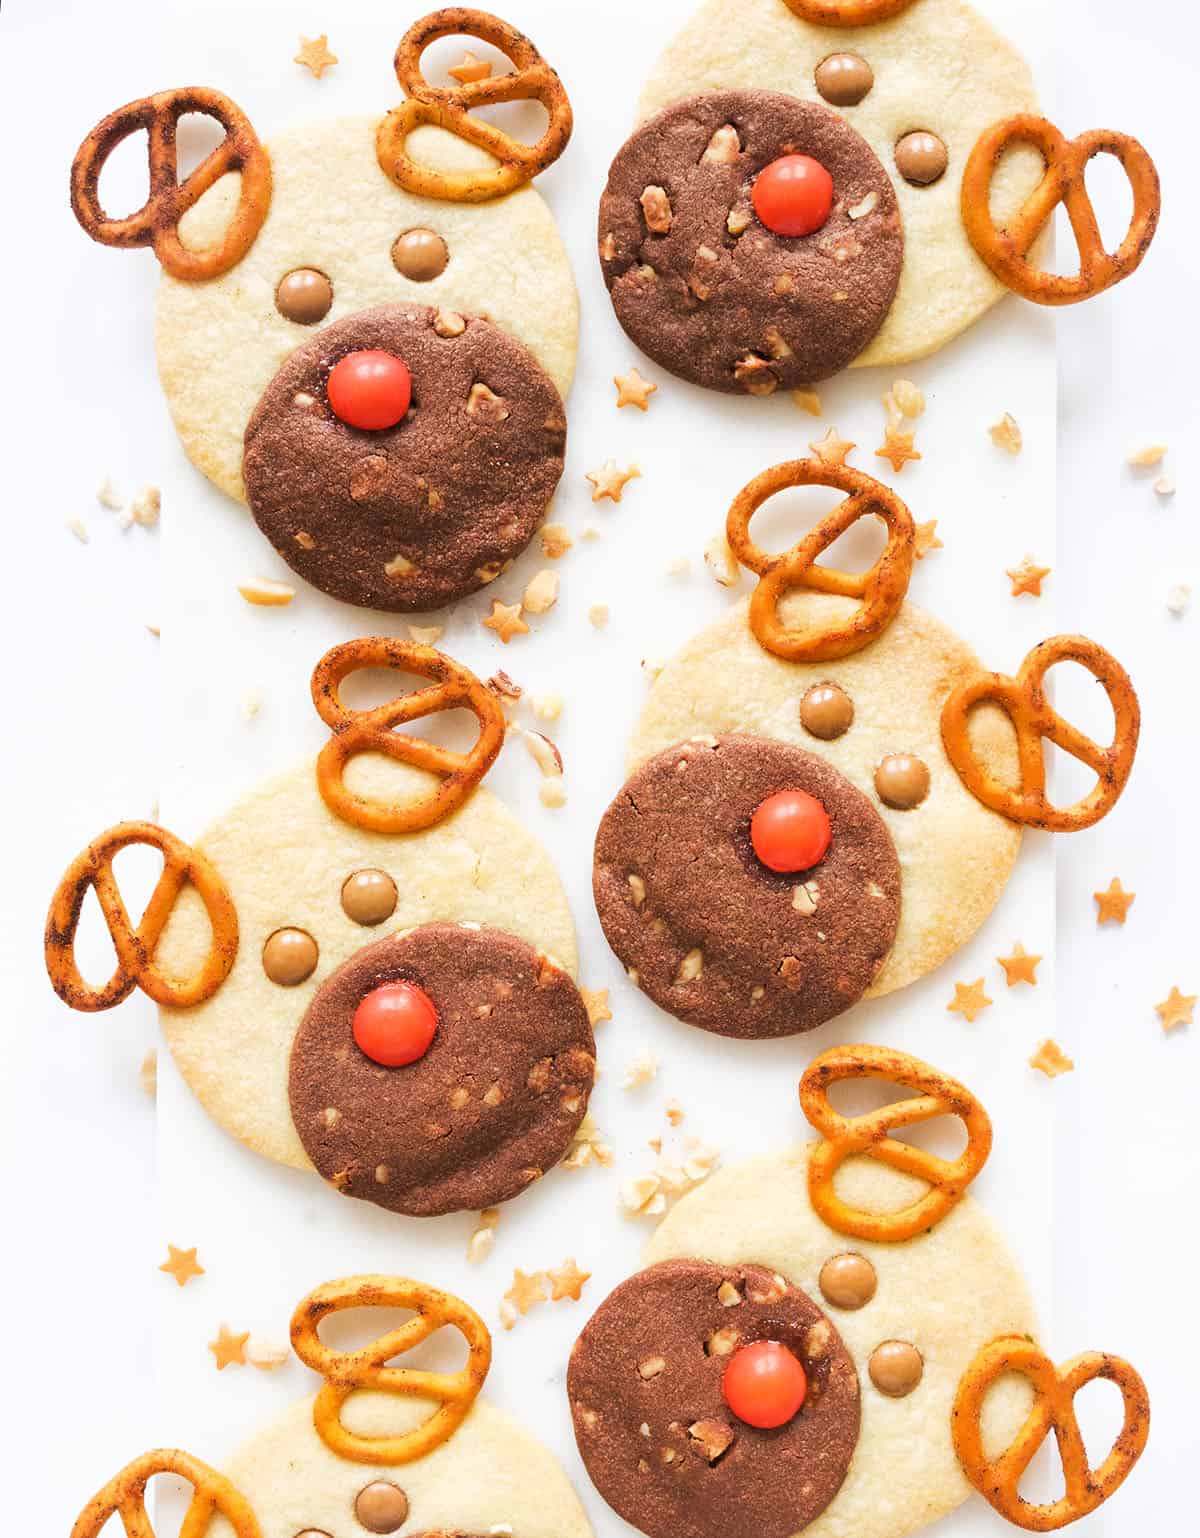 Top view of a few reindeer cookies over a white background.